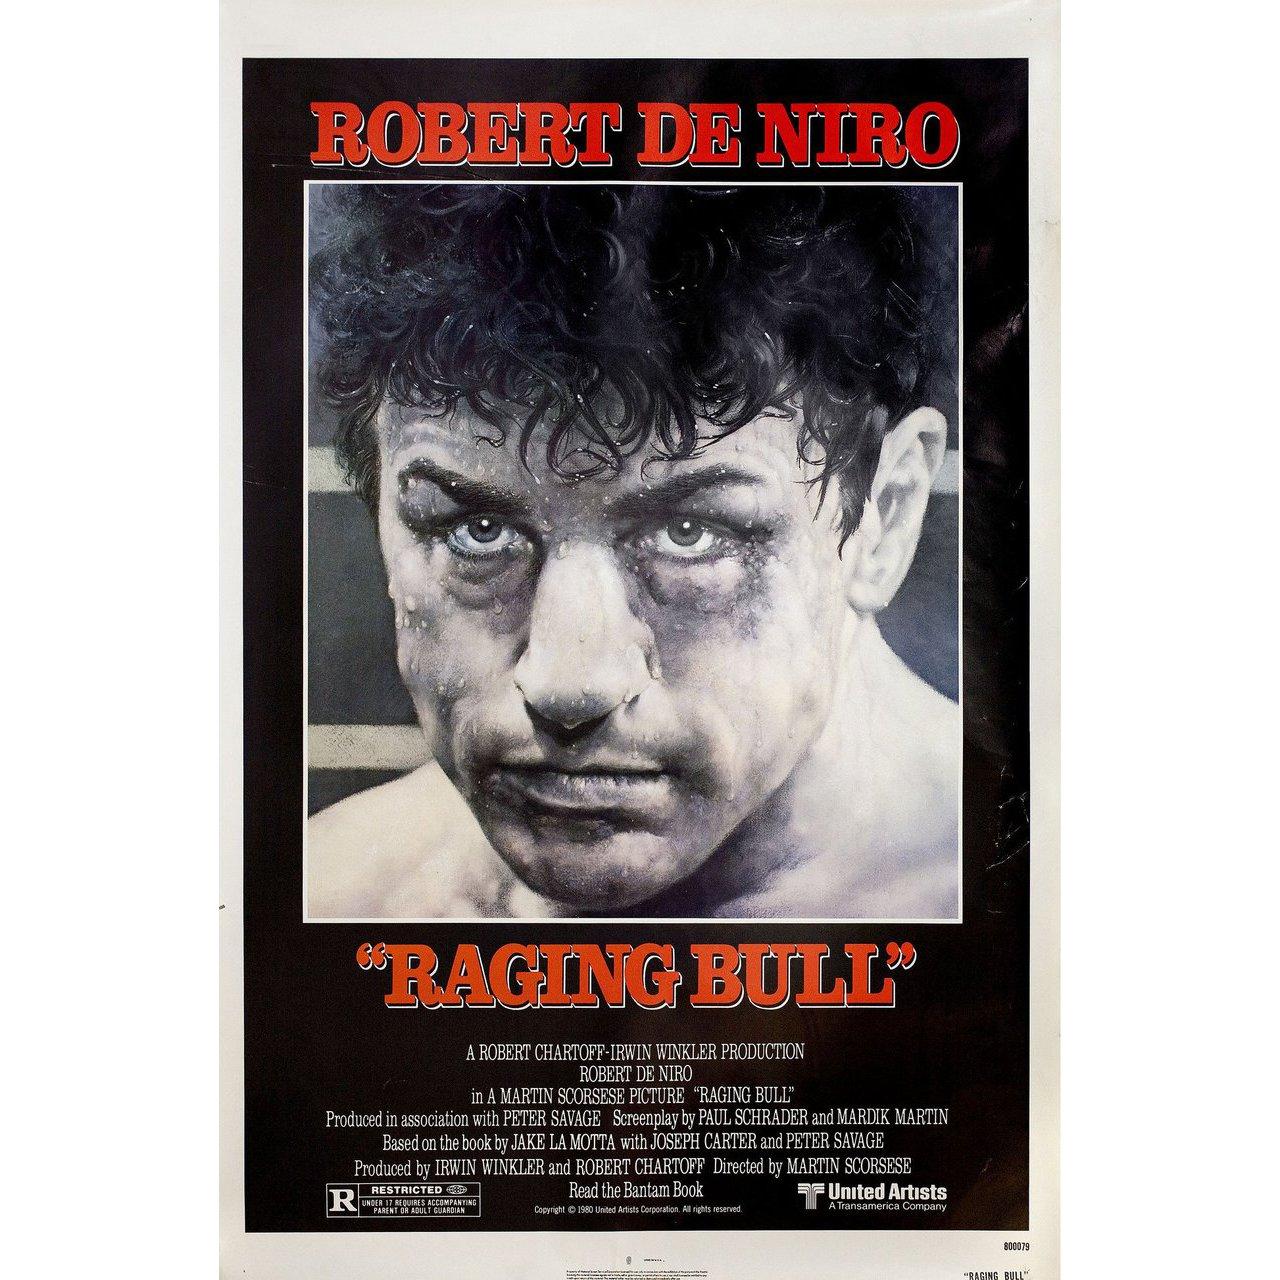 Original 1980 U.S. one sheet poster by Kunio Hagio for the film ‘Raging Bull’ directed by Martin Scorsese with Robert De Niro / Cathy Moriarty / Joe Pesci / Frank Vincent. Very good-fine condition, rolled. Please note: the size is stated in inches